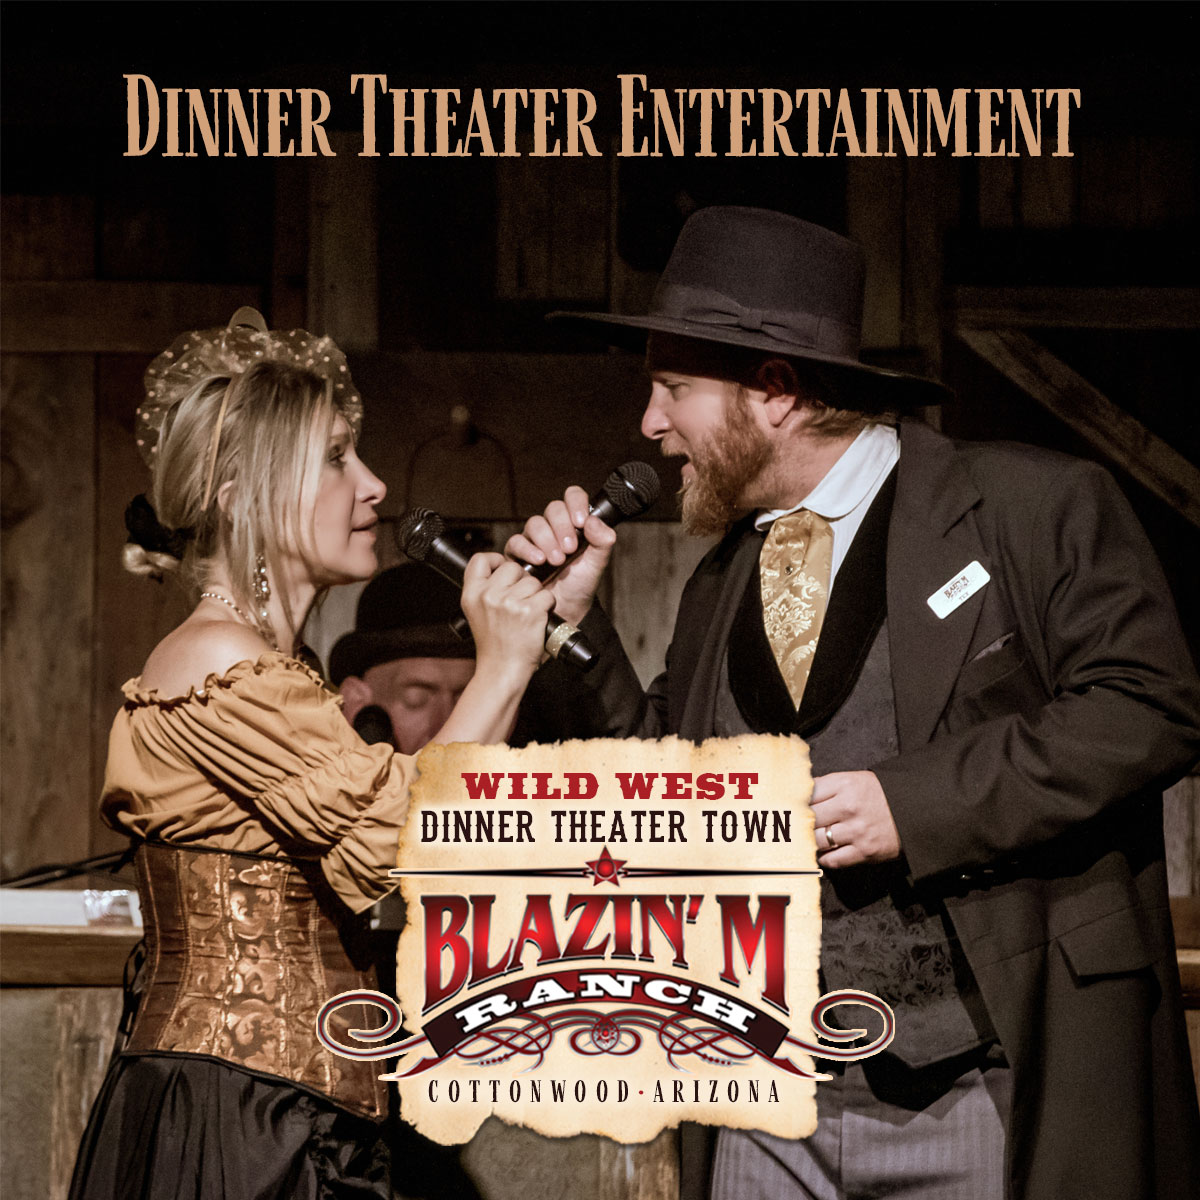 The whole family will enjoy a Dinner and Show at Blazin' M Ranch! Book your tickets now → zurl.co/b3SI 

#Cottonwood #Sedona #Campverde #Jerome #Arizona #ArizonaTravel  #DinnerAndAShow #BlazinMRanch #FamilyFun #ArizonaEntertainment